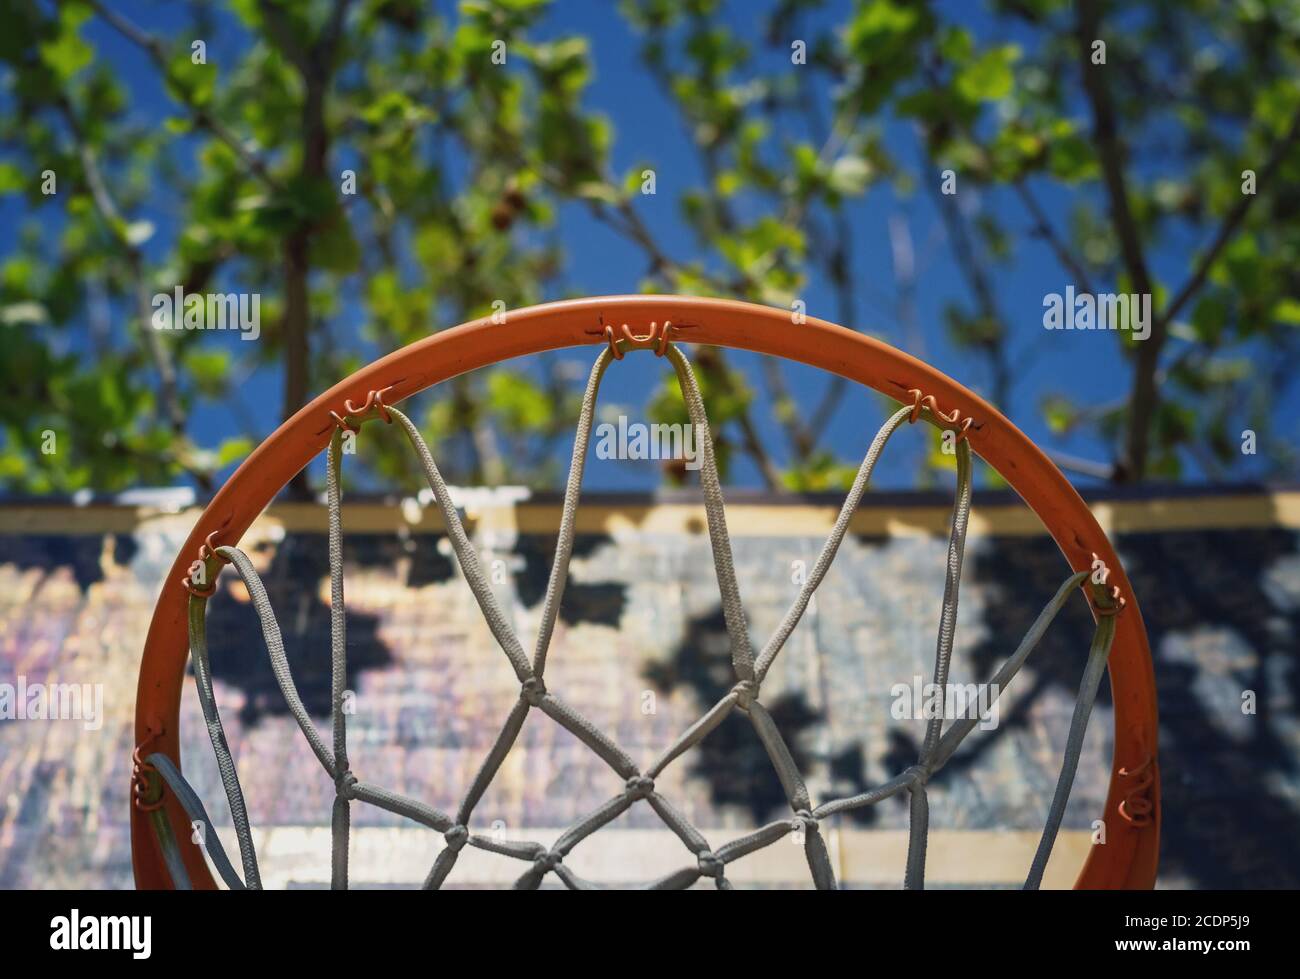 Detail of a basketball hoop on the playground viewed from below Stock Photo